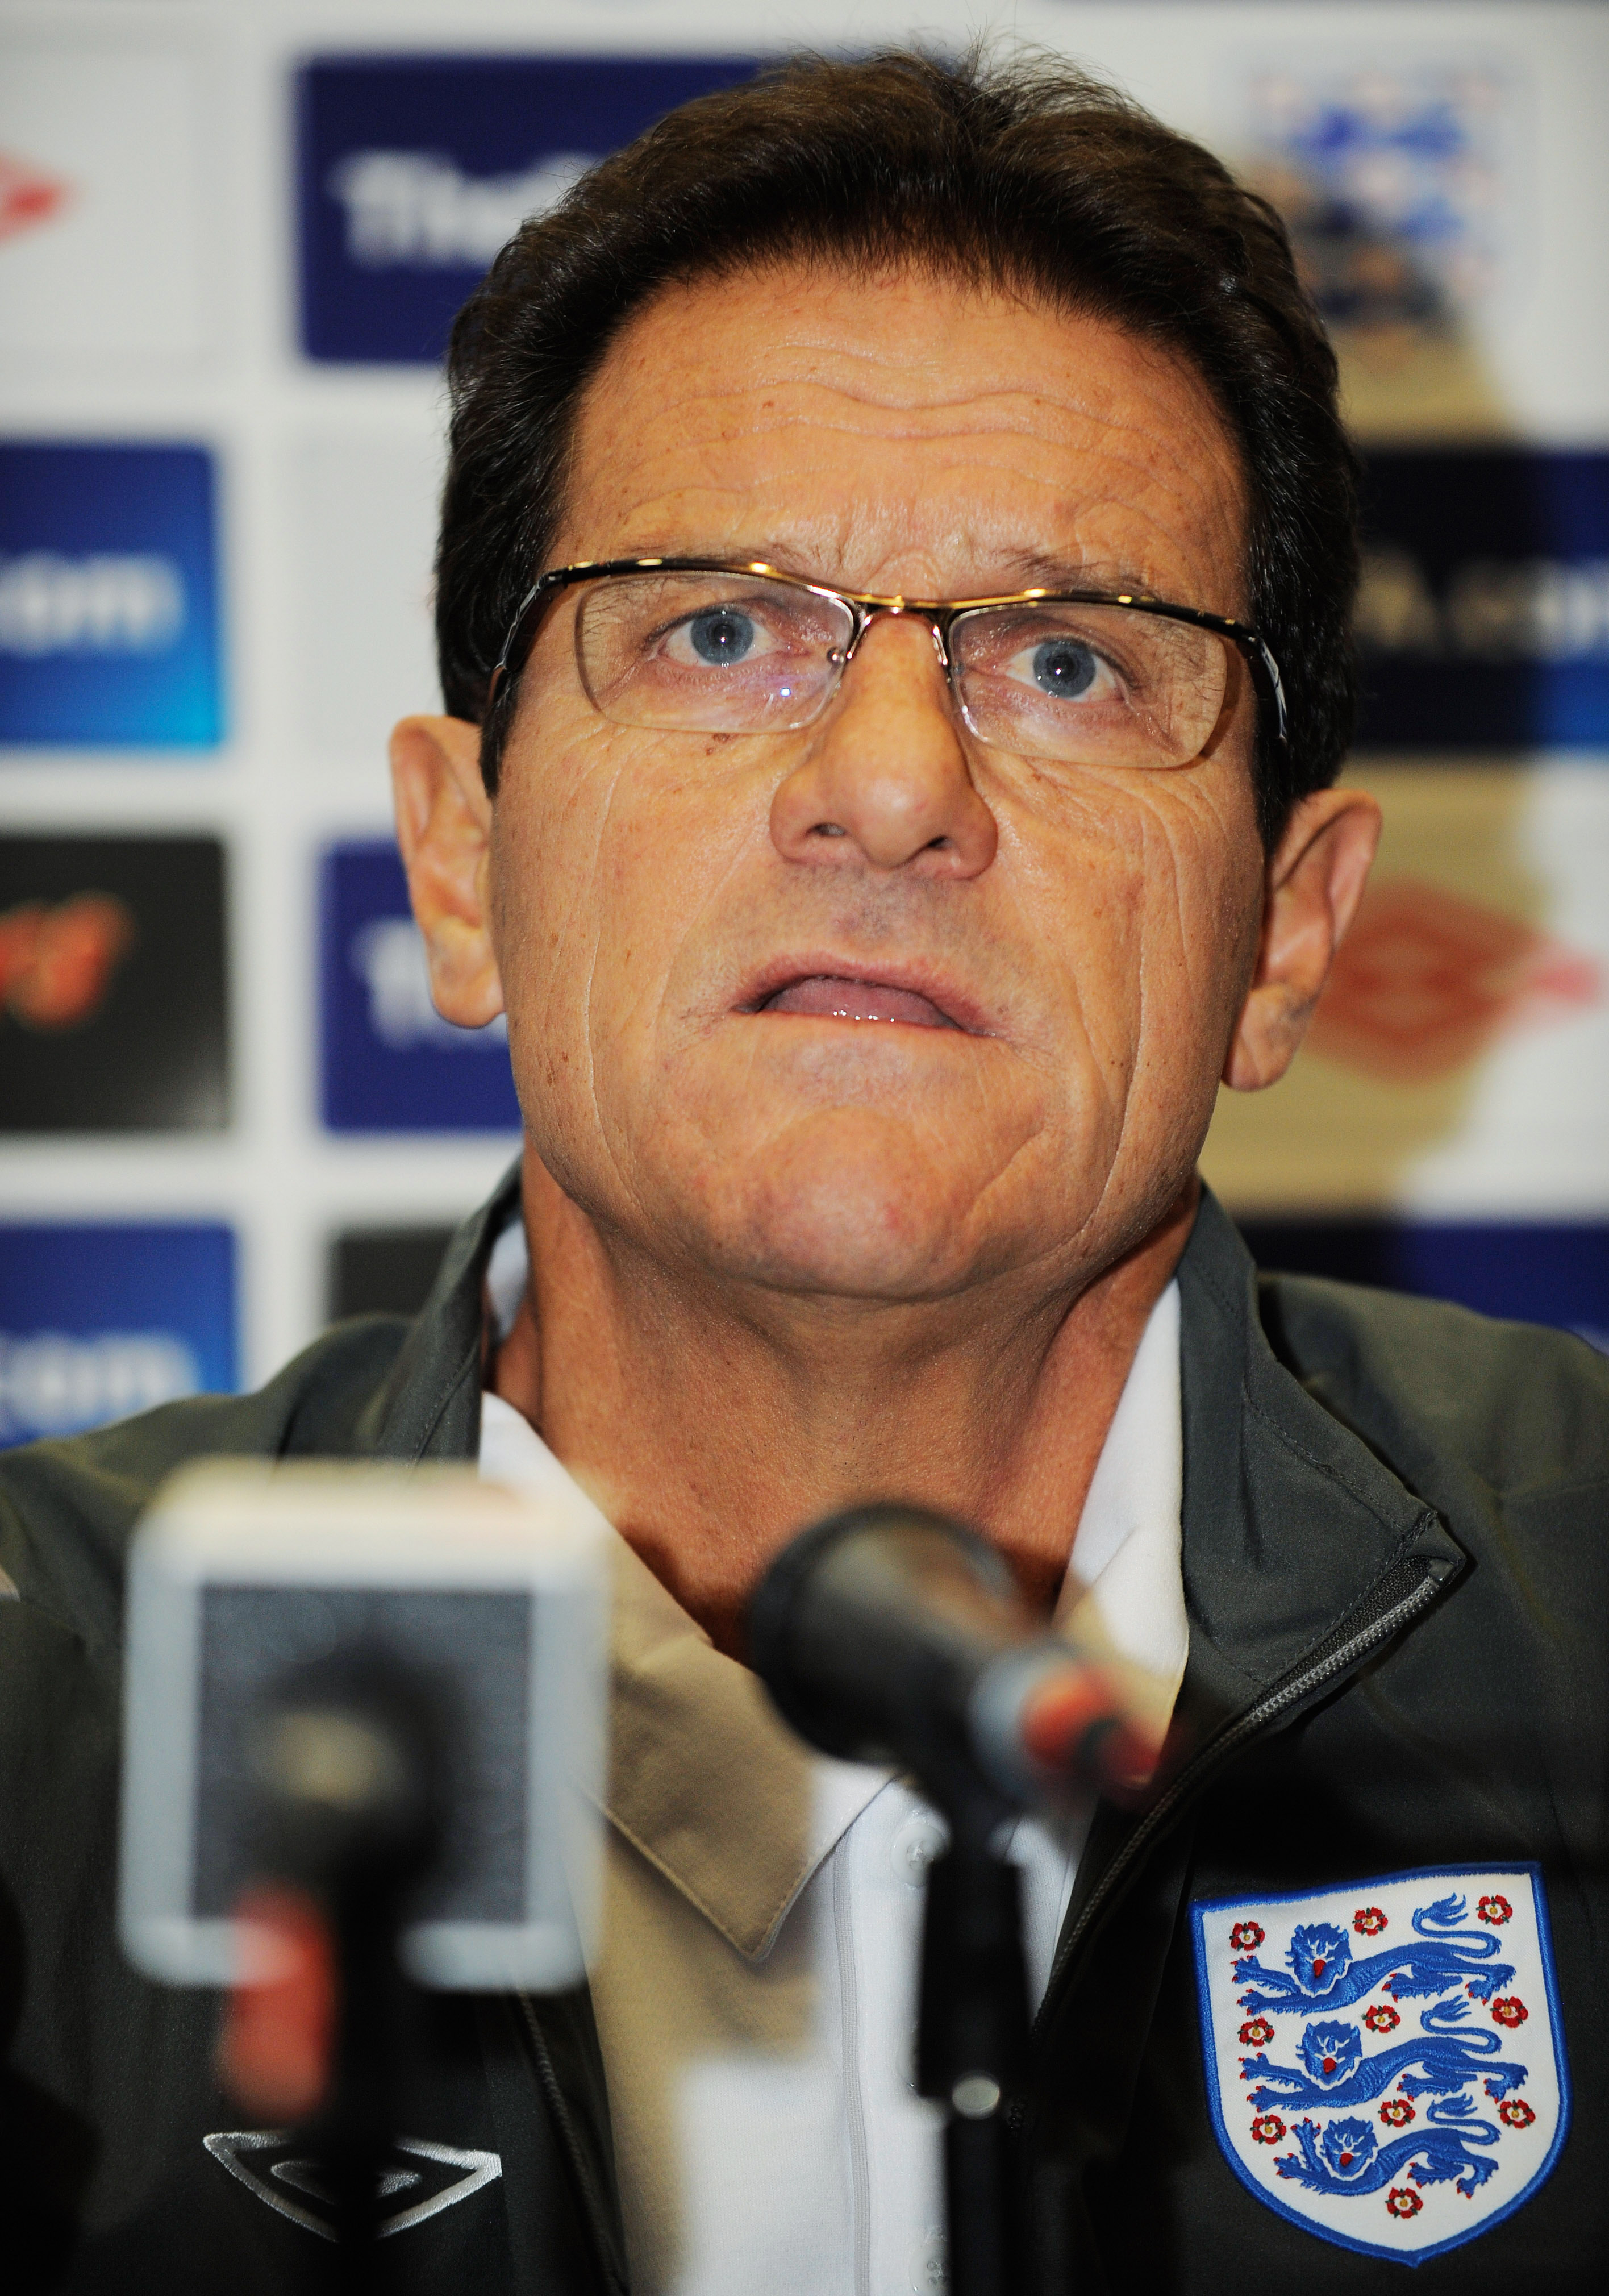 LONDON, ENGLAND - NOVEMBER 16:  England manager Fabio Capello speaks to the press after the England training session at Wembley Stadium on November 16, 2010 in London, England.  (Photo by Michael Regan/Getty Images)